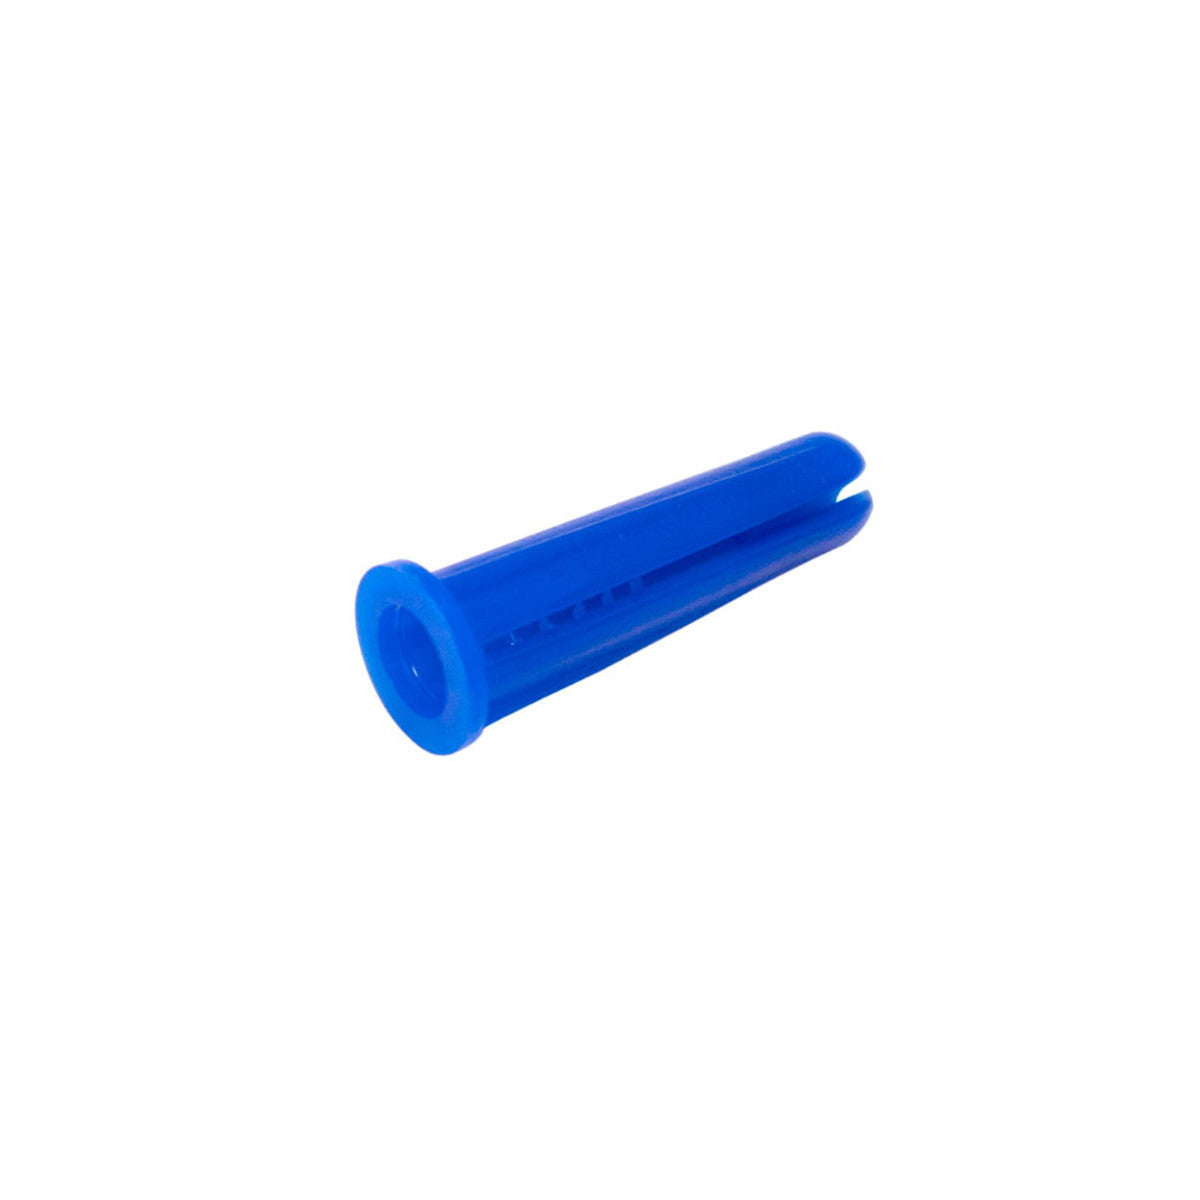 Conical Plastic Expansion Anchors